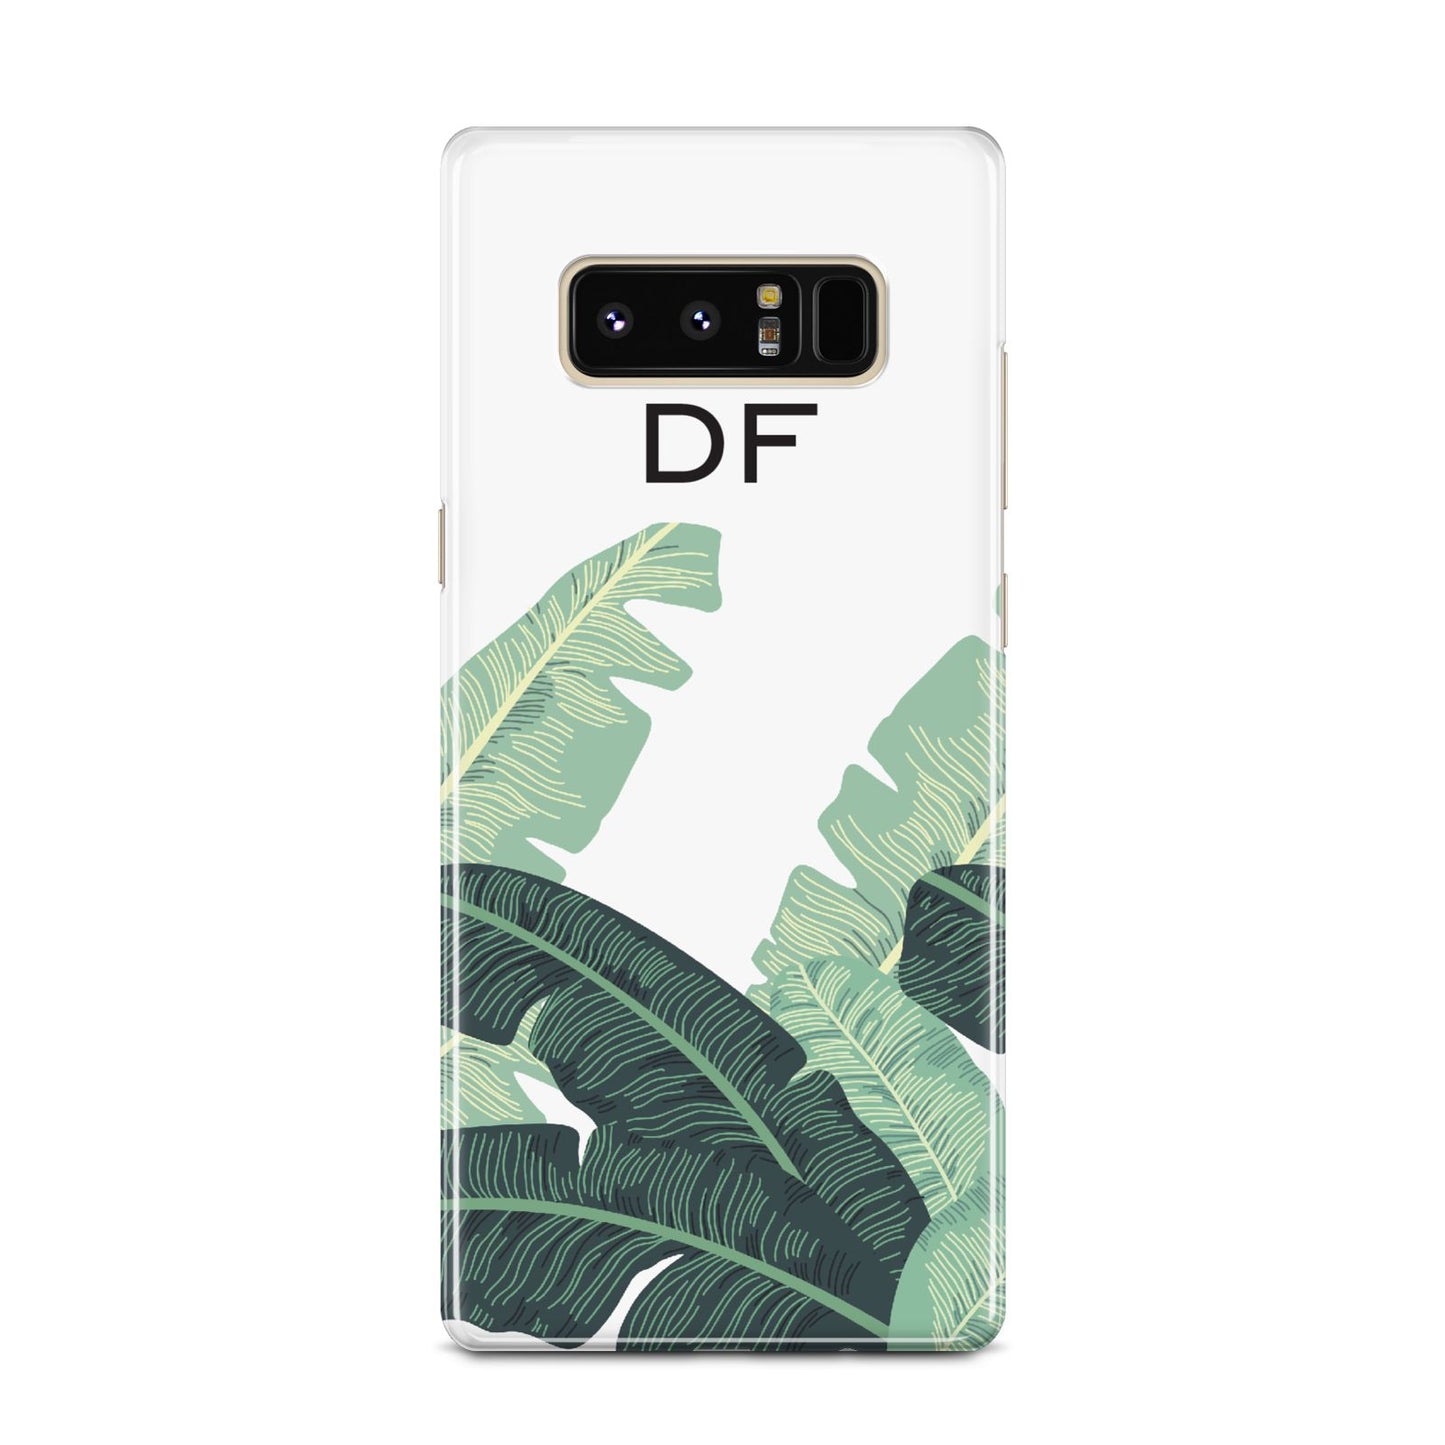 Personalised White Banana Leaf Samsung Galaxy Note 8 Case